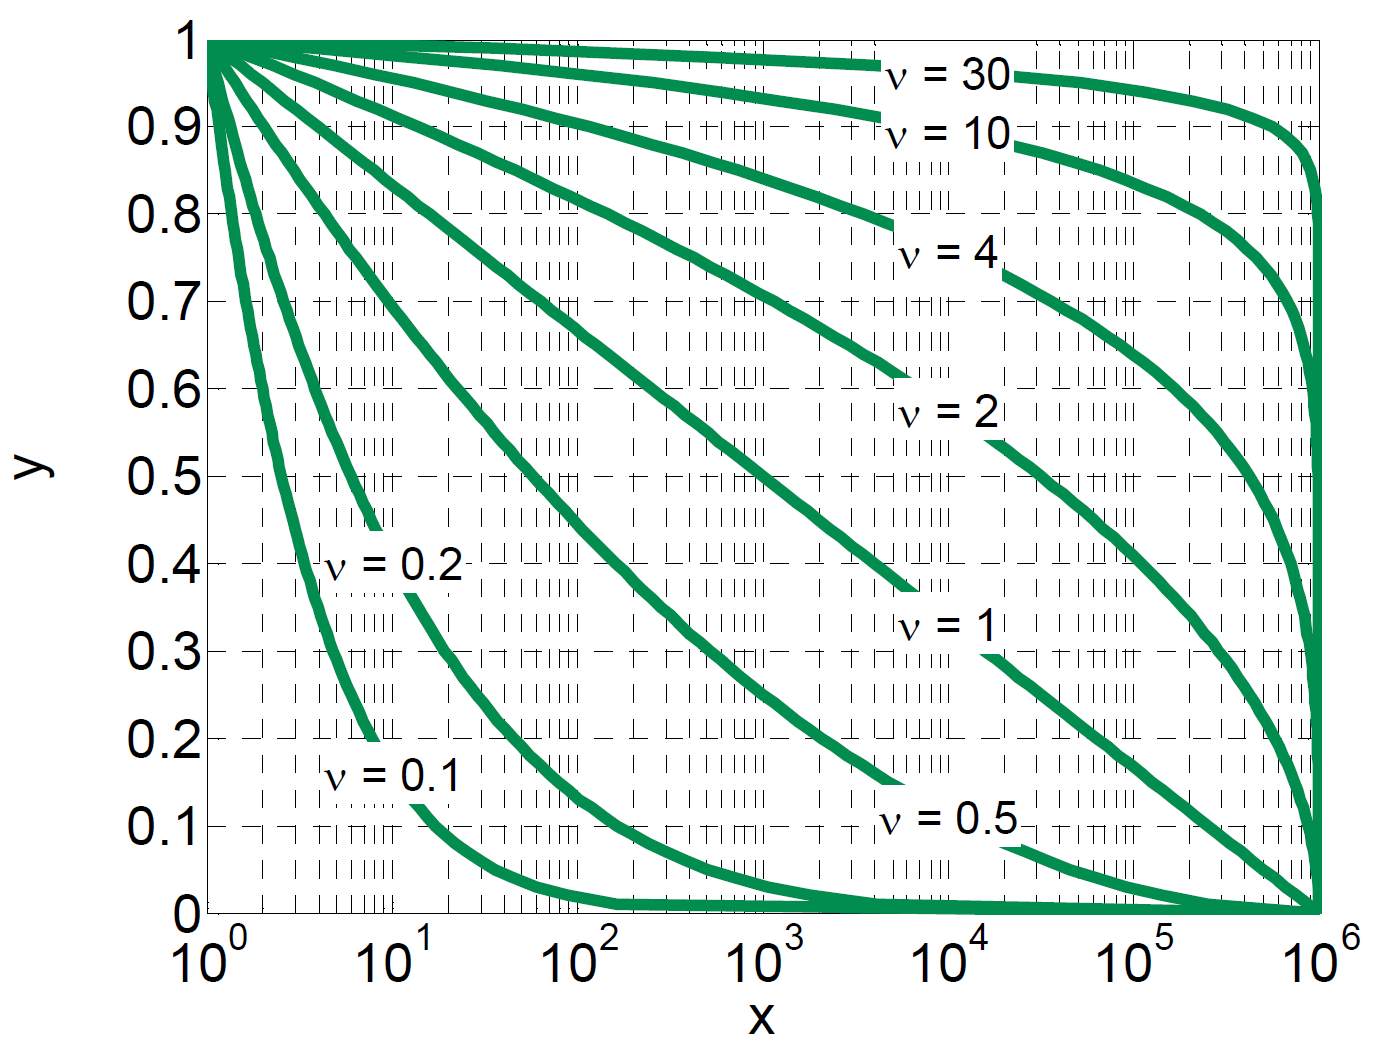 Synthetic spectra for different shape parameters